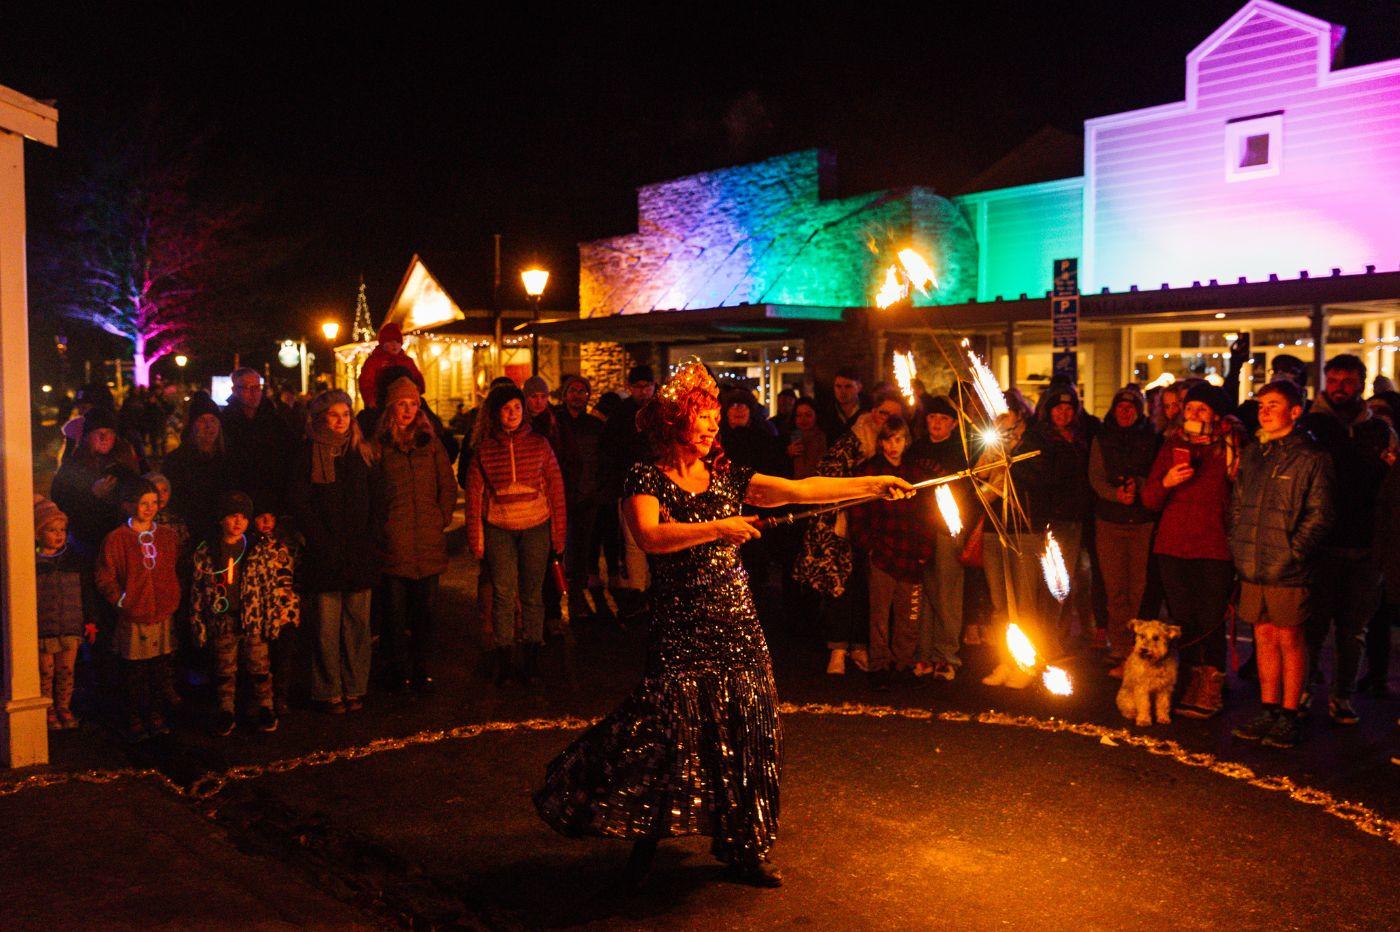 Fire dancer performs to crowd at night during Matariki Arrowtown Lights